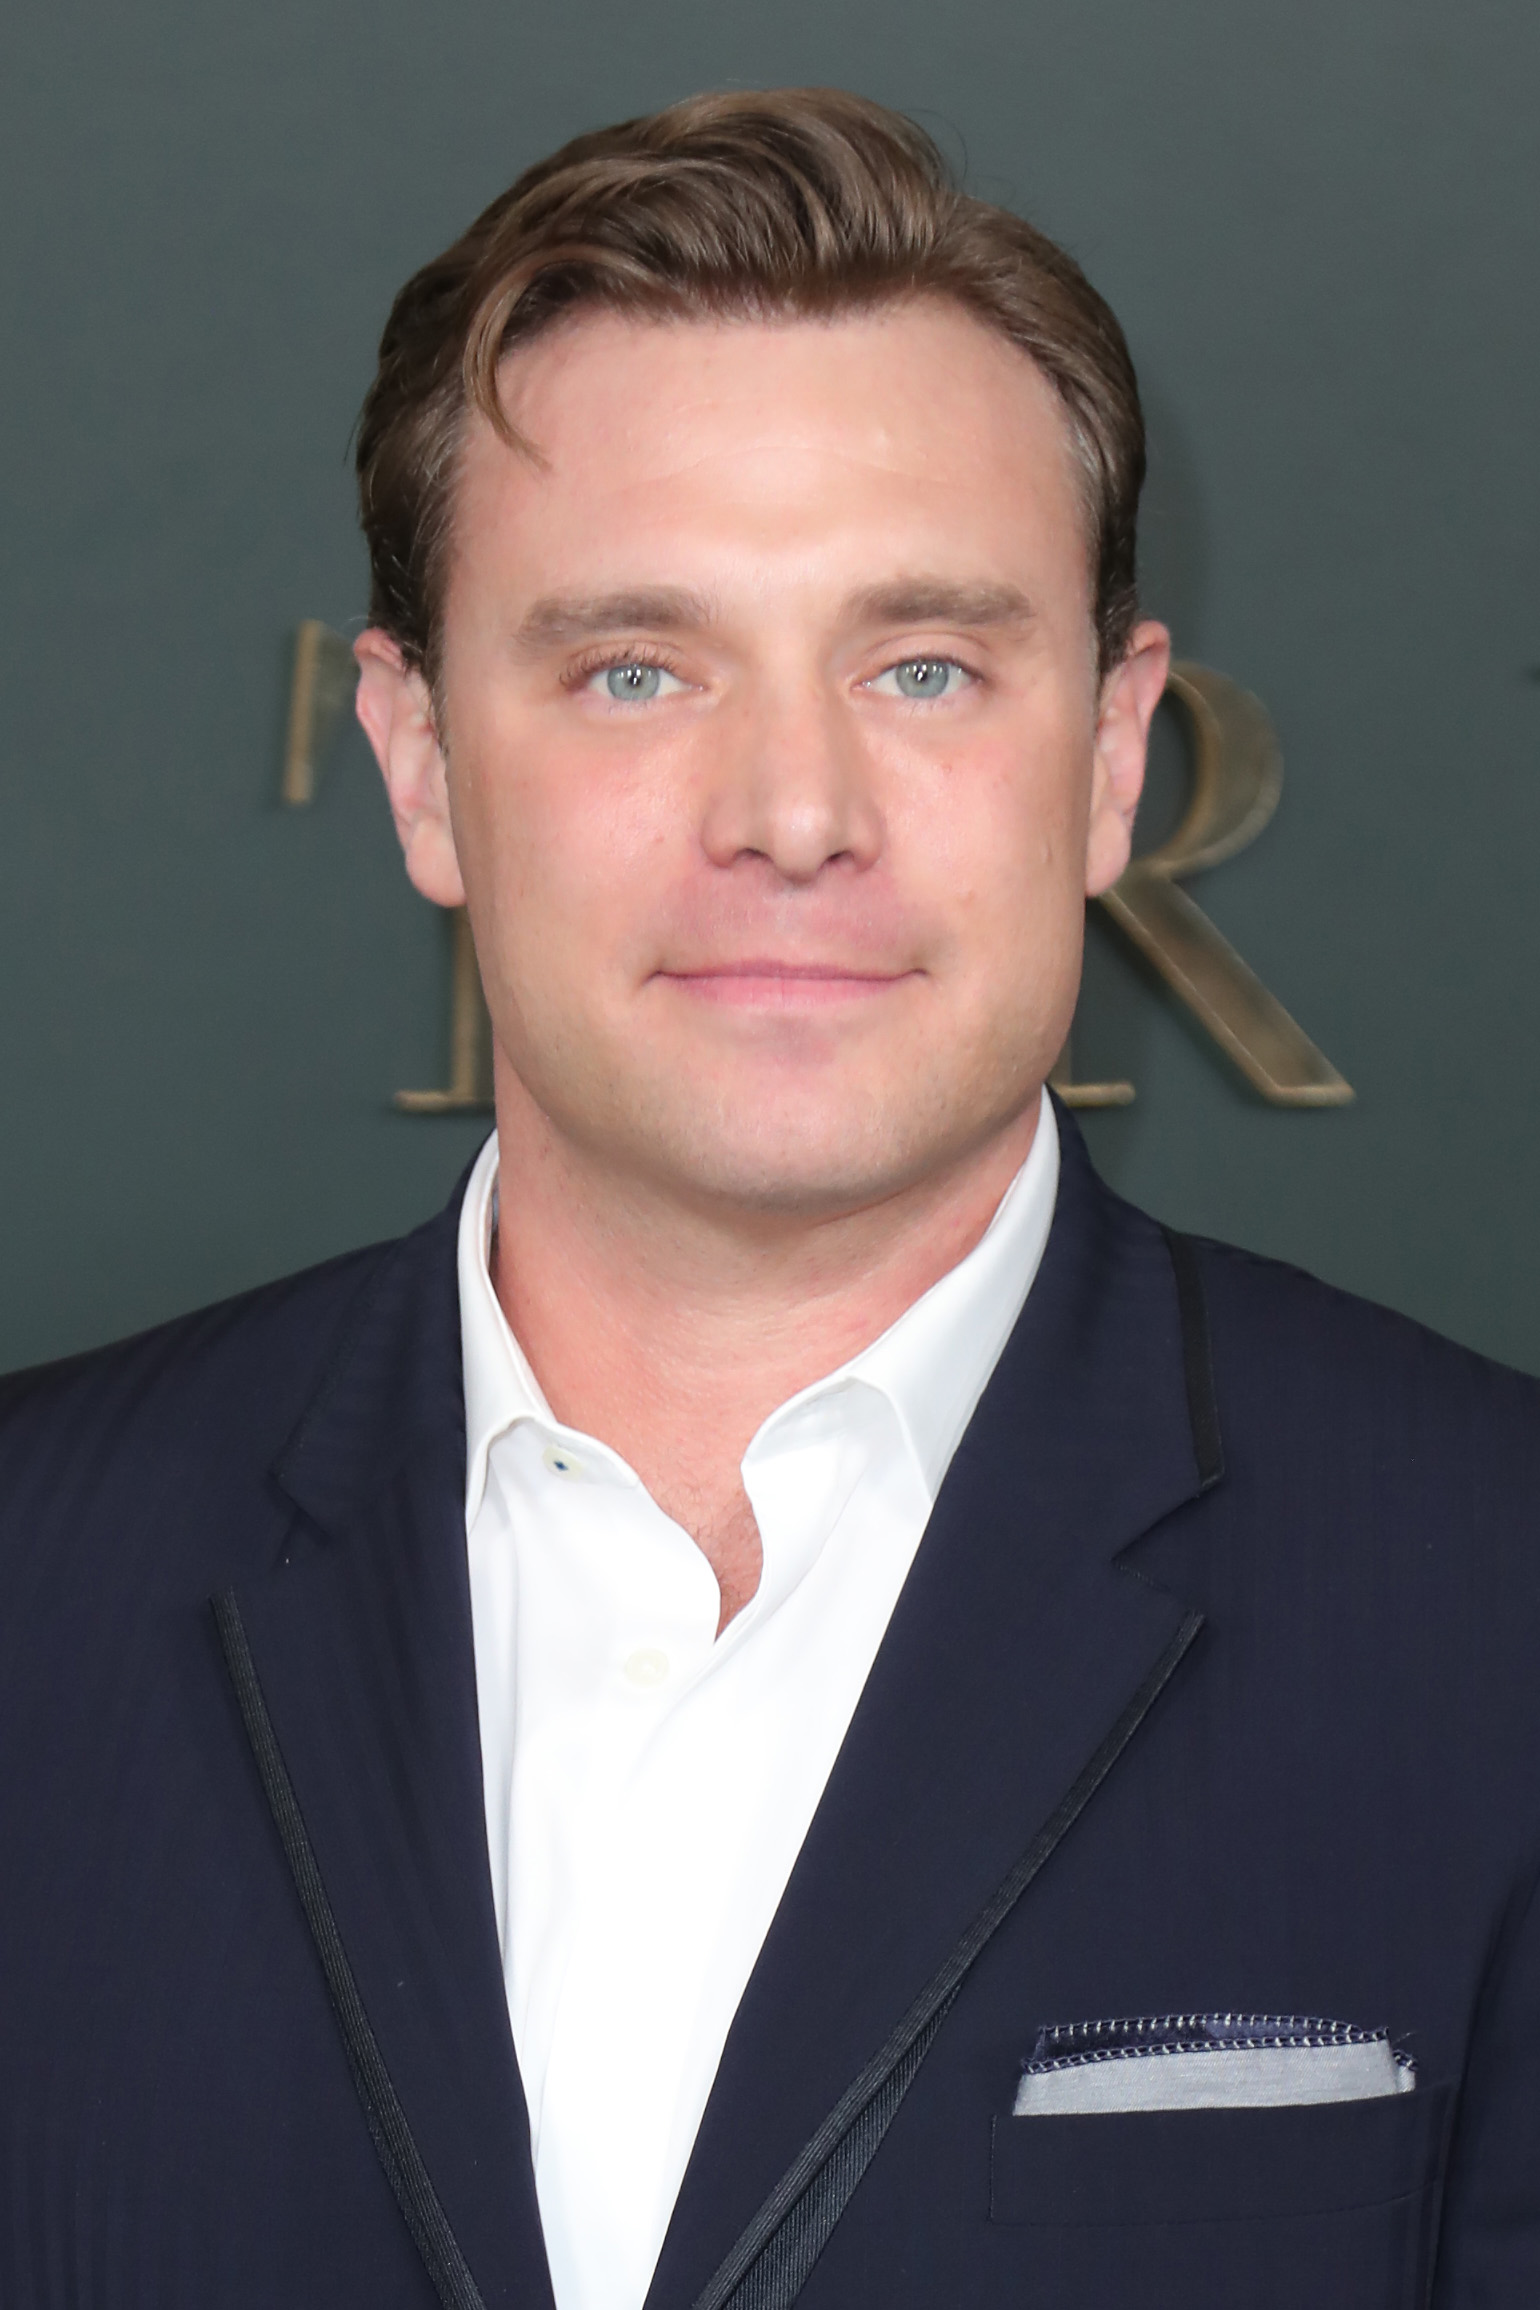 Billy Miller at the premiere for "Truth Be Told" in Beverly Hills, 2019 | Source: Getty Images